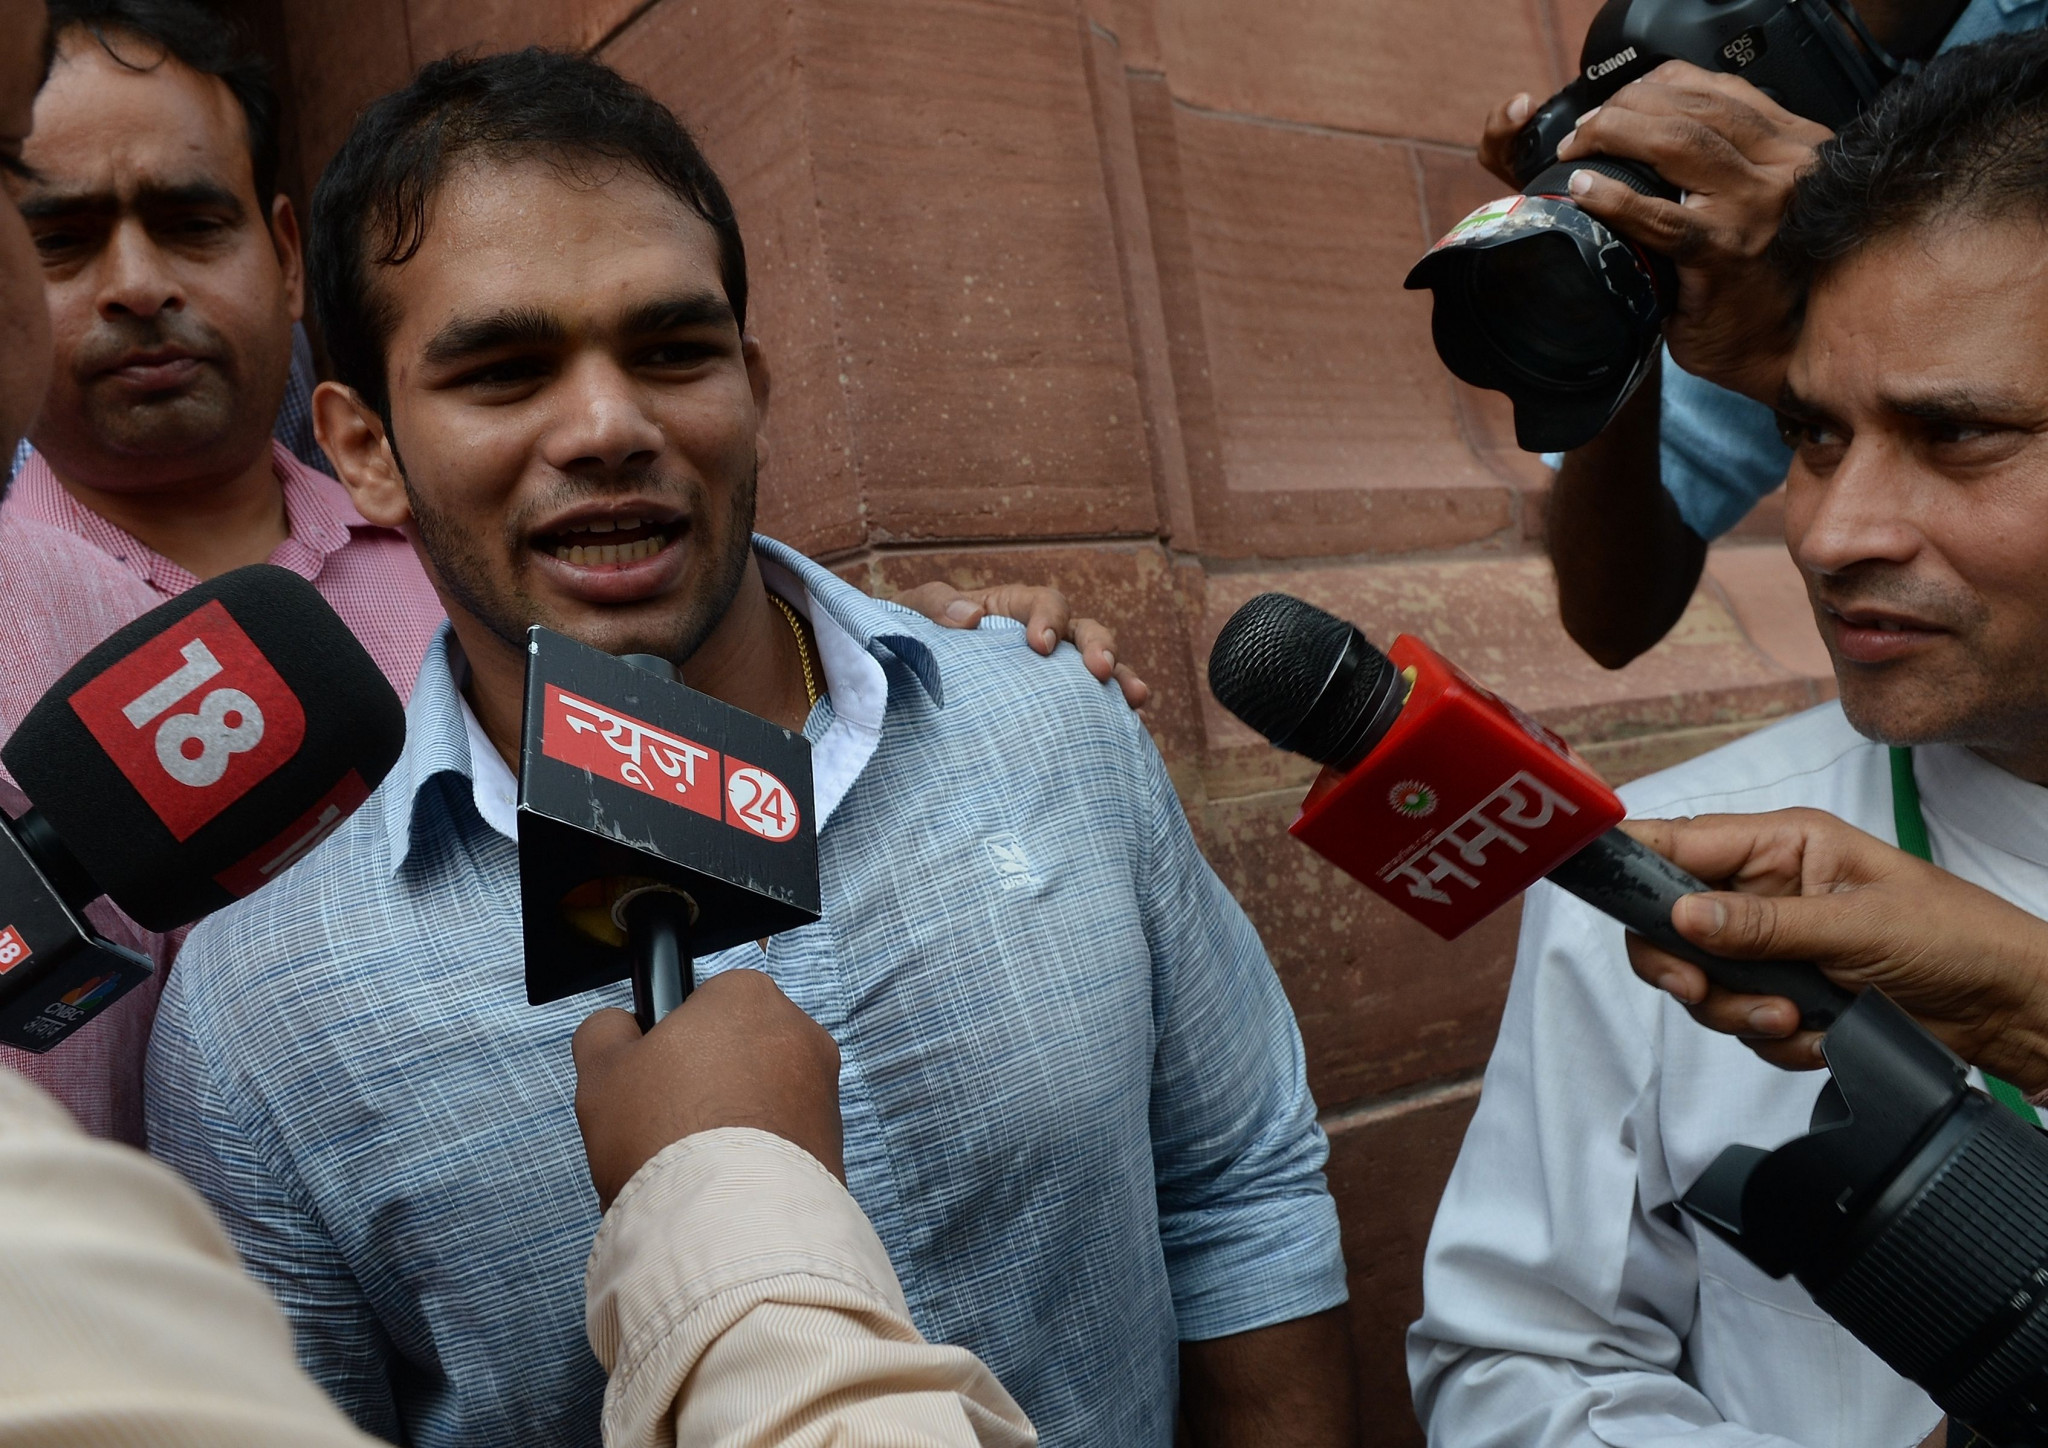 Narsingh Yadav has always insisted his food was spiked and he did not dope intentionally ©Getty Images